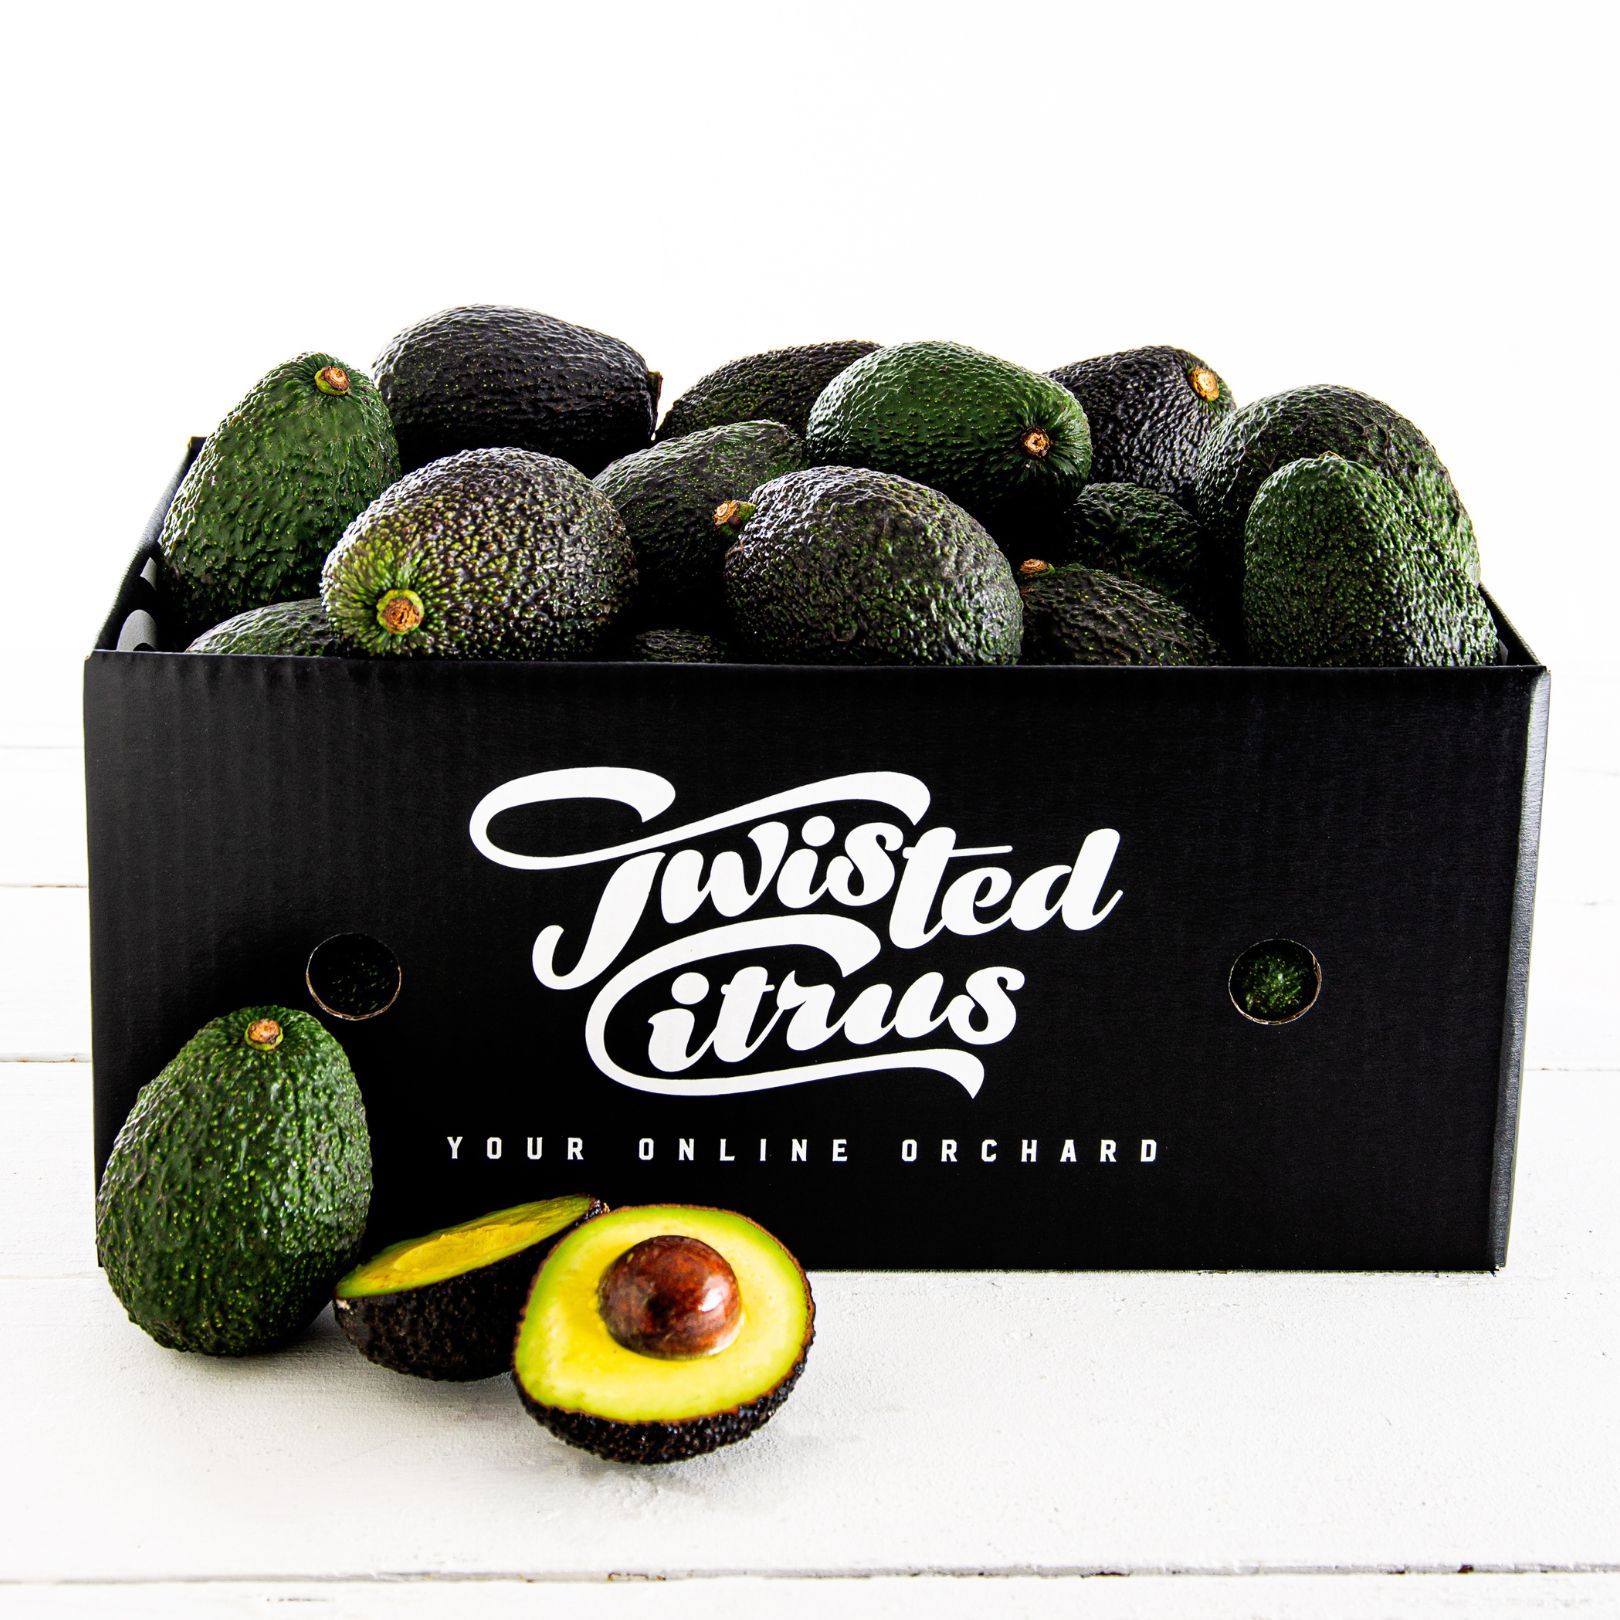 Buy Avocados - Hass Online NZ - Twisted Citrus